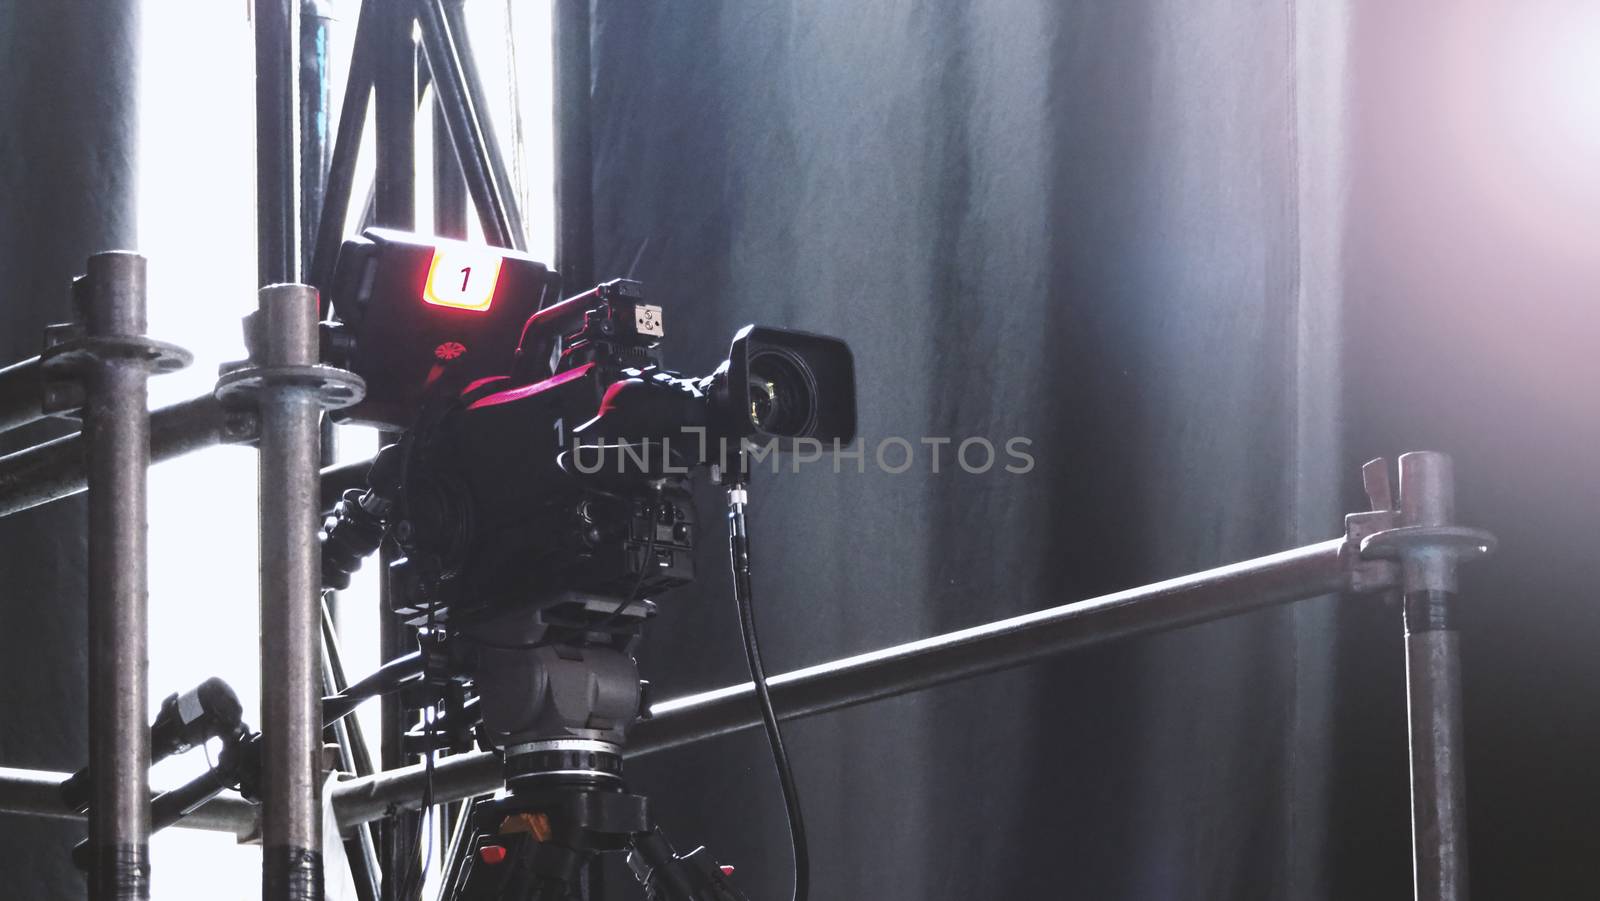 Blurry images of broadcast camera on the crane tripod for easy to shooting or recording and broadcasting content in studio production to on air tv or online internet live show.